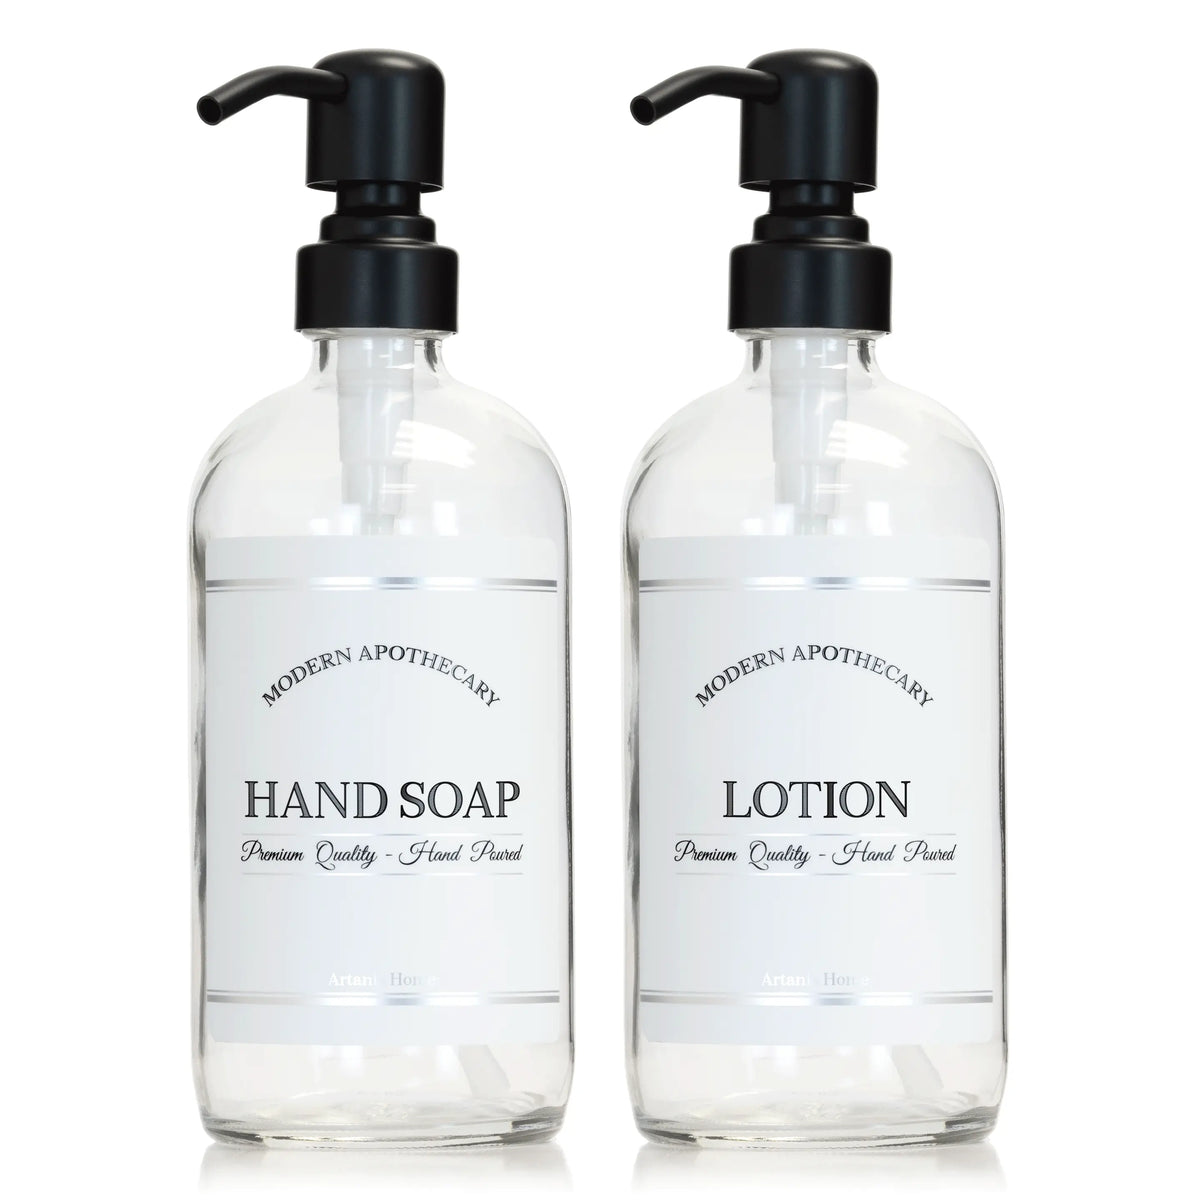 Clear glass Boston round hand soap and lotion soap dispensers for bathroom accessories with black stainless steel pumps.